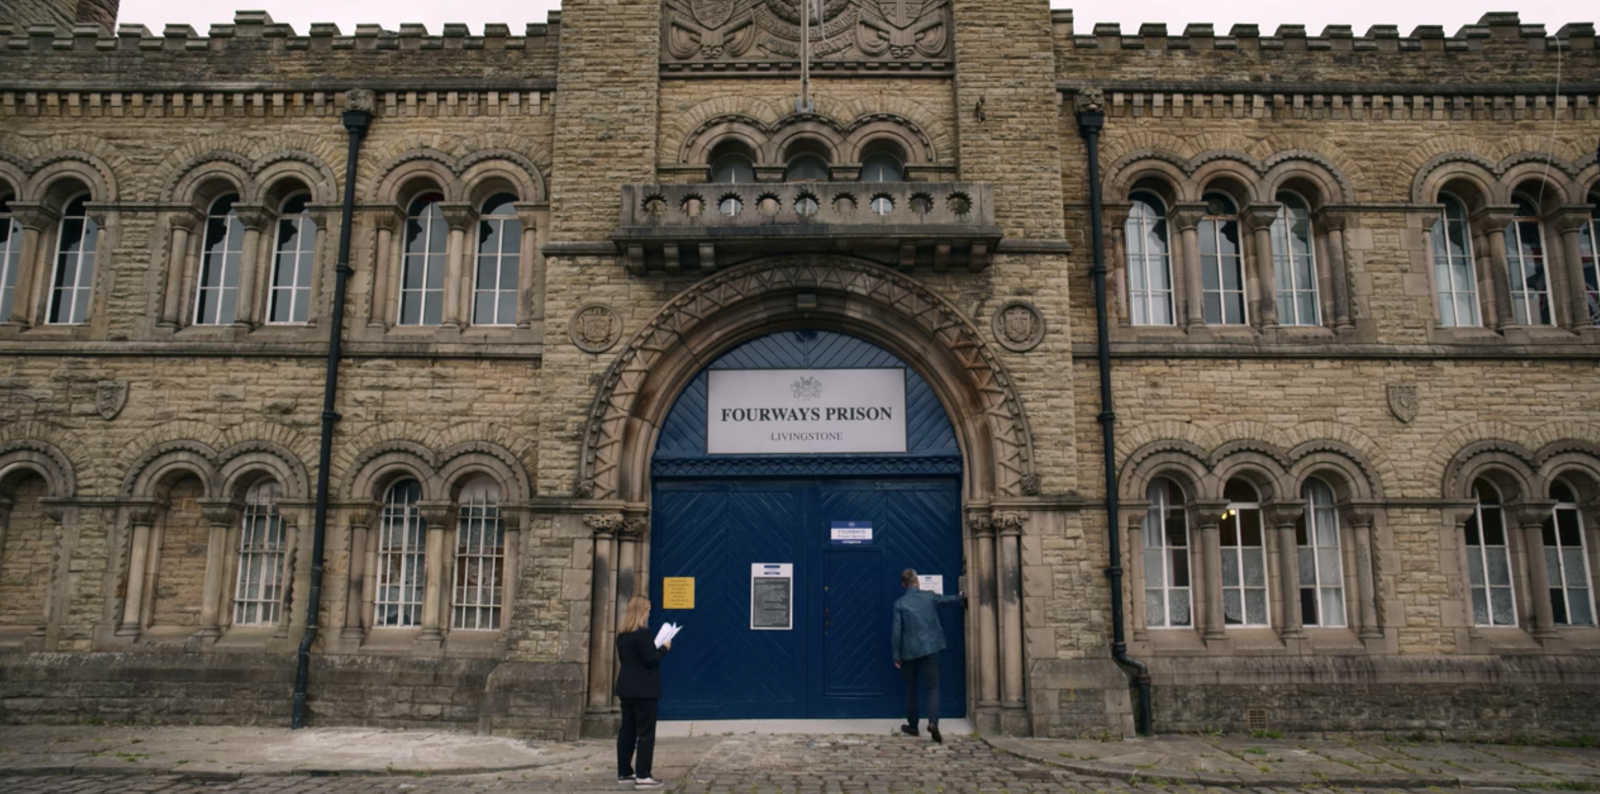 Stay Close &#8211; filming locations around Manchester as new Netflix crime drama tops charts, The Manc